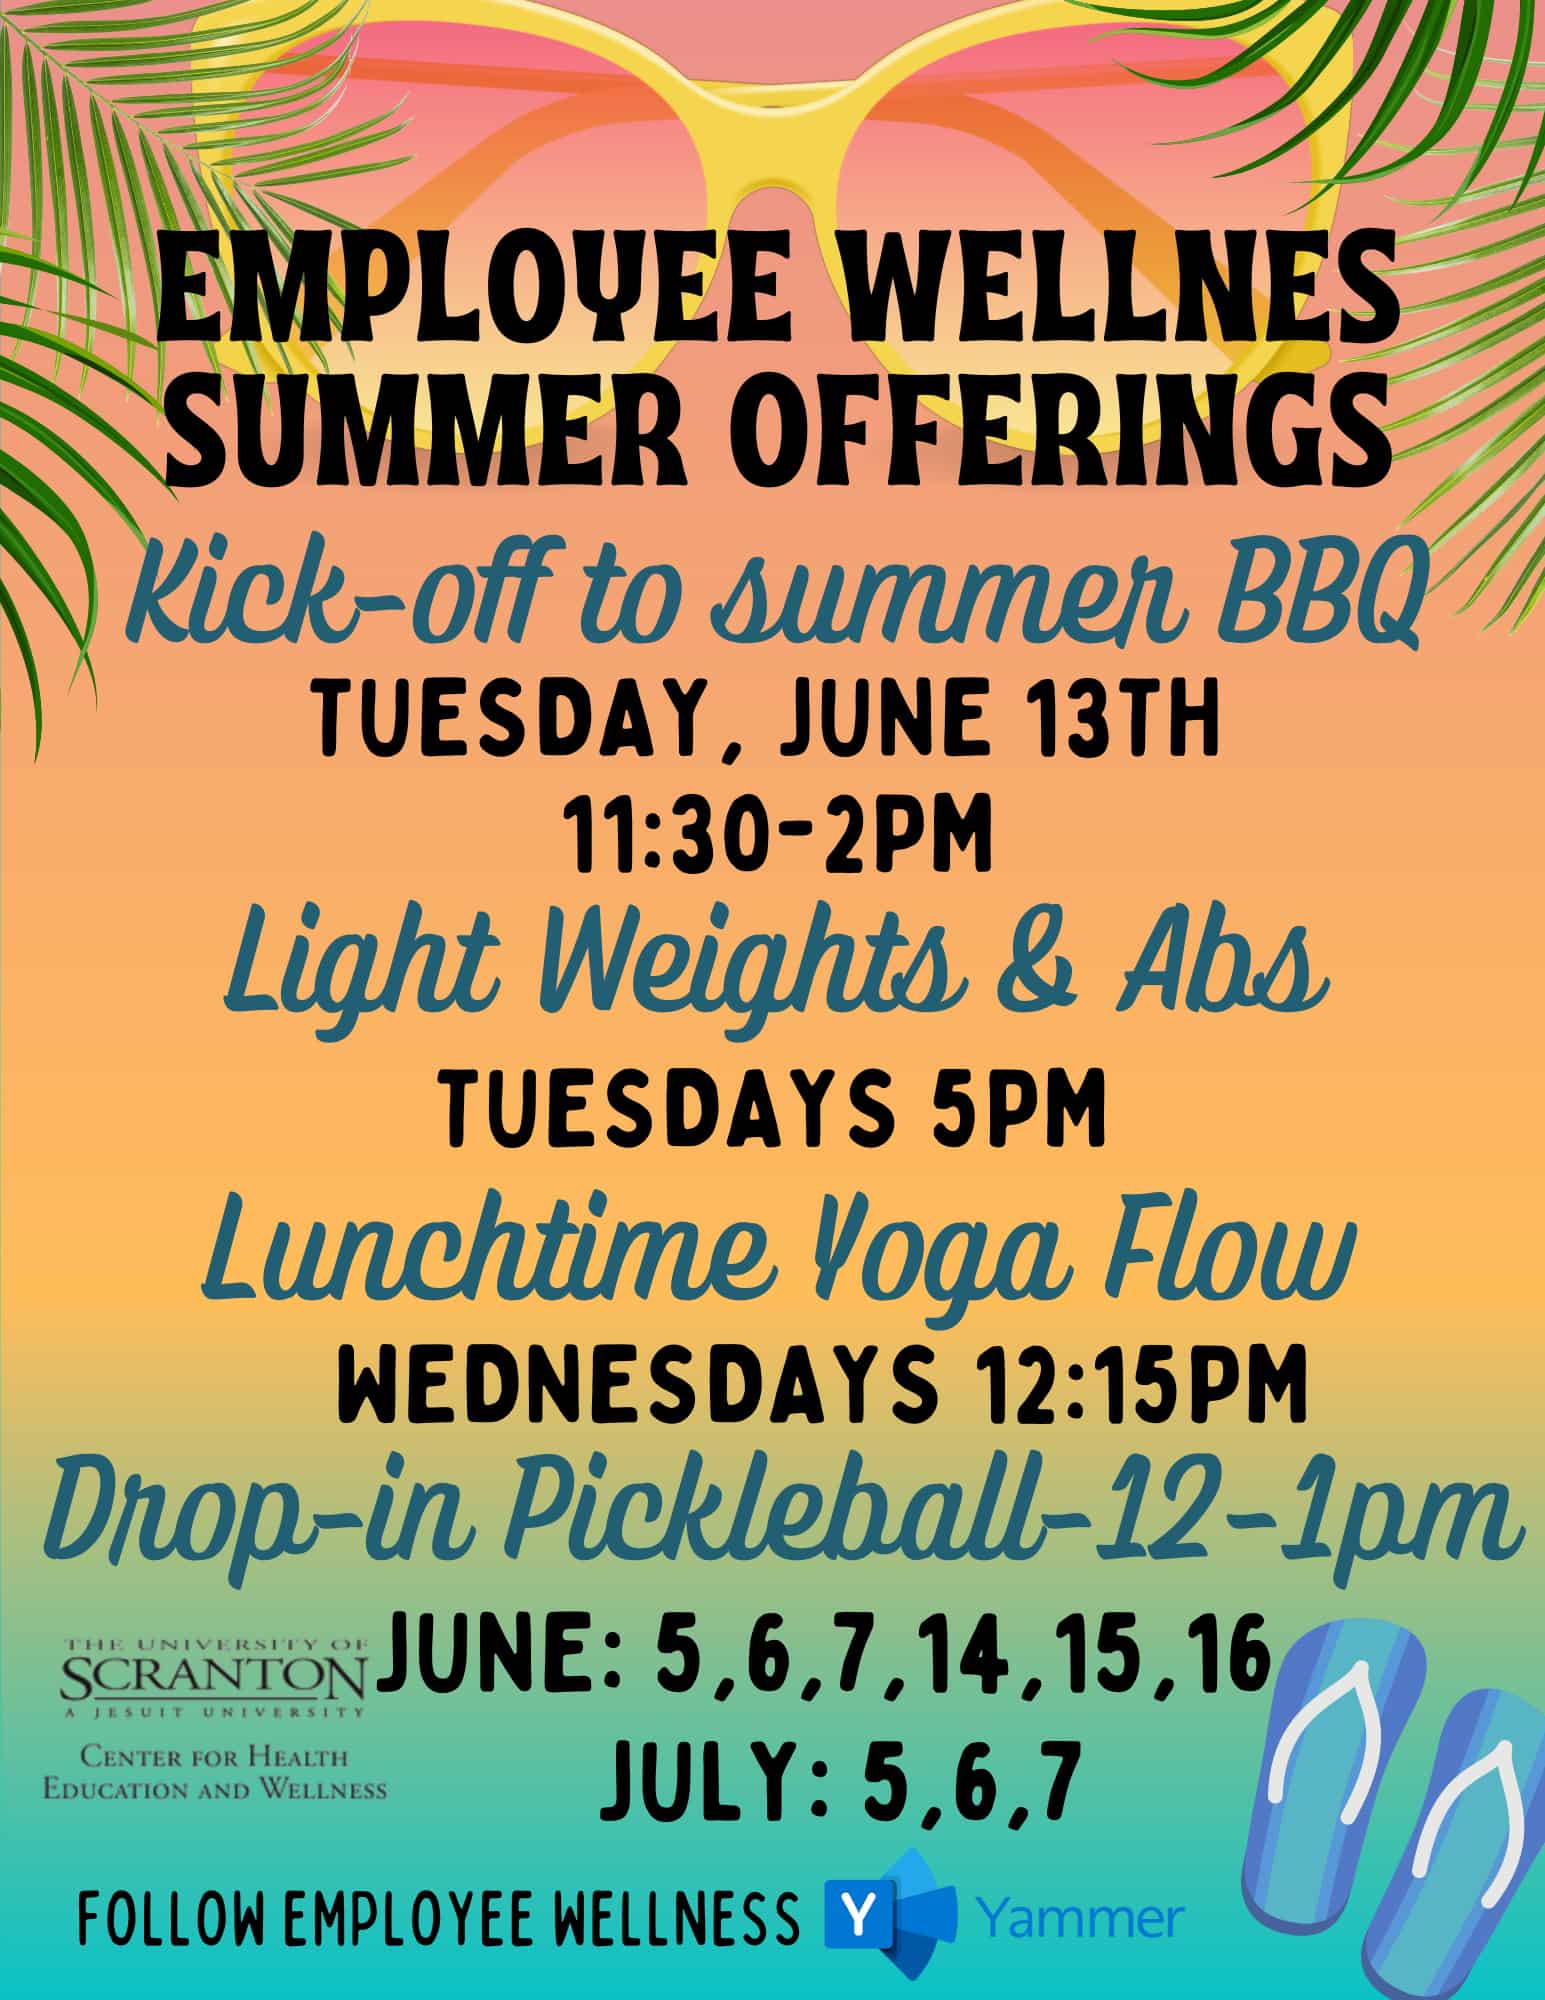 tropical ferns, yellow sunglass froames over sand and ocean blue colors with employye wellness class schedule. 